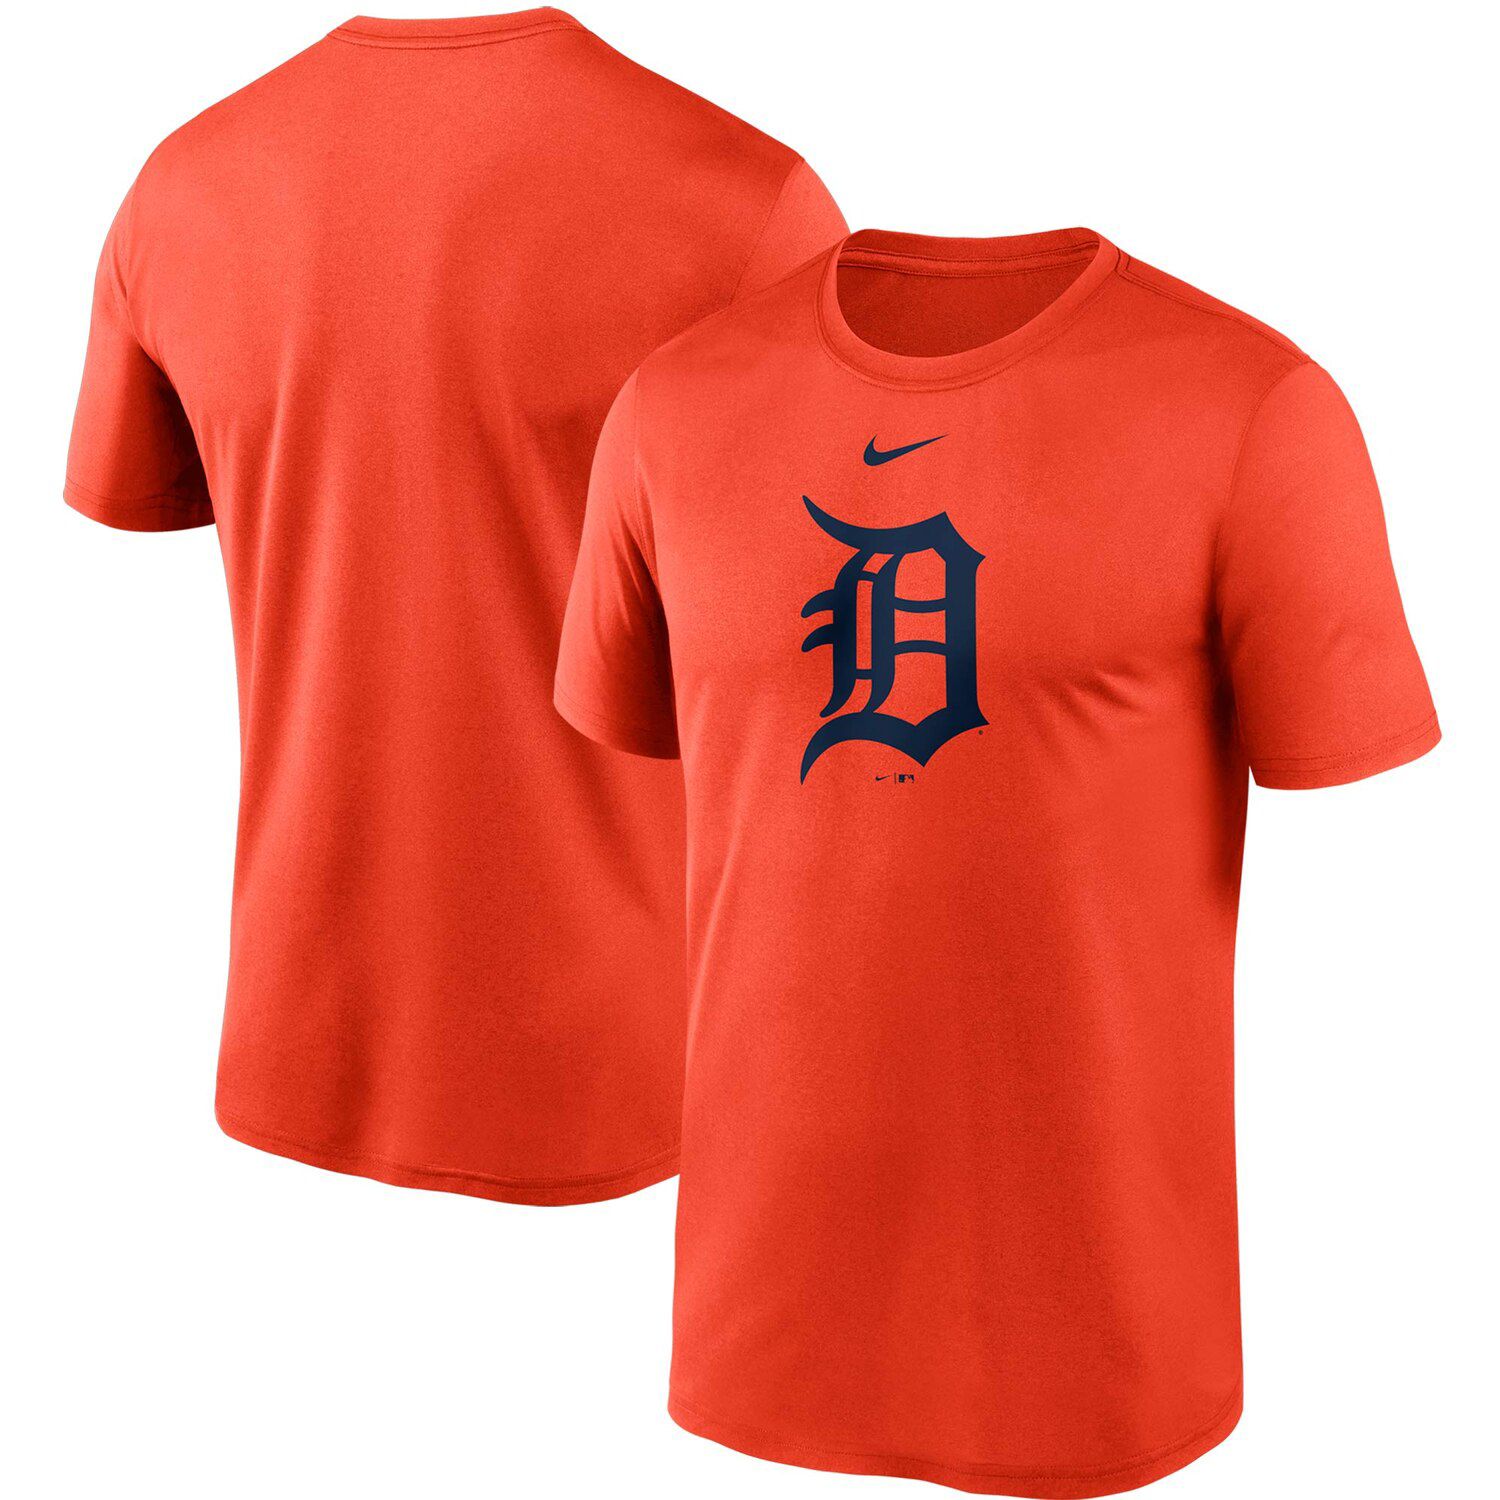 tigers shirts at meijer